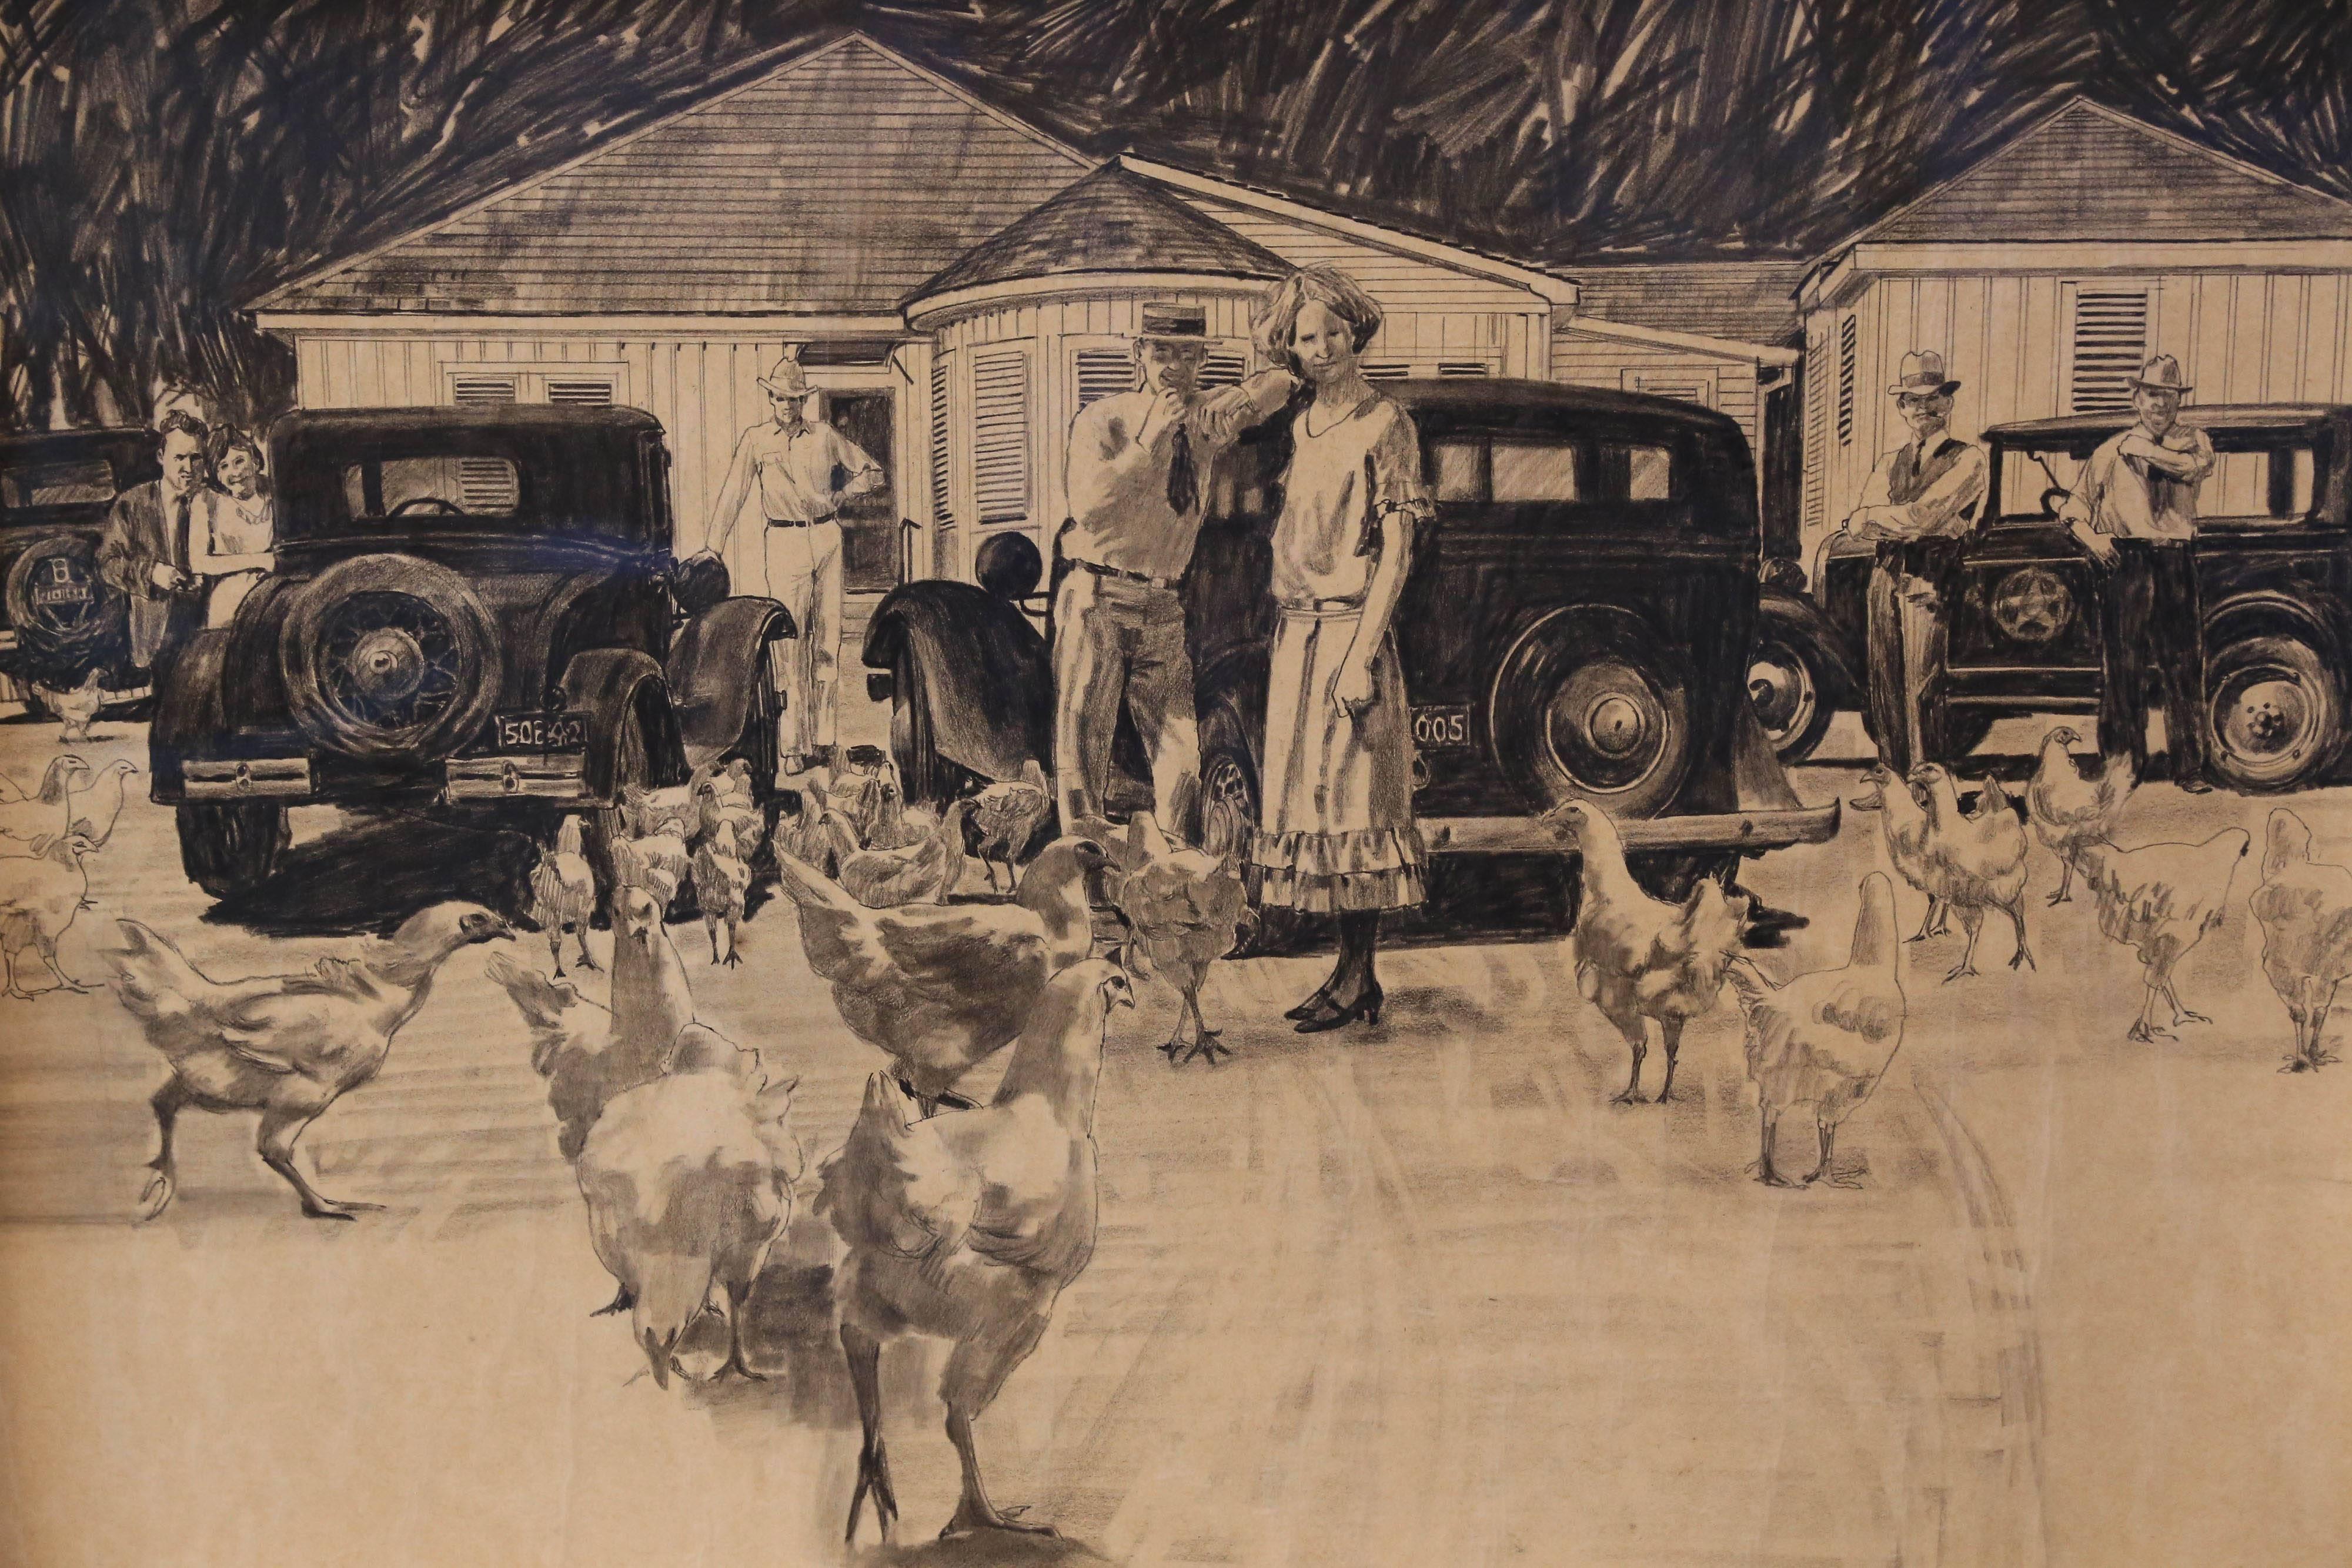 Houston artist Al Bates (1931-...). Charcoal on a thin tracing paper. Signed lower right. Depicting the chicken ranch, with Bonnie and Clyde. Measures: 17 1/2